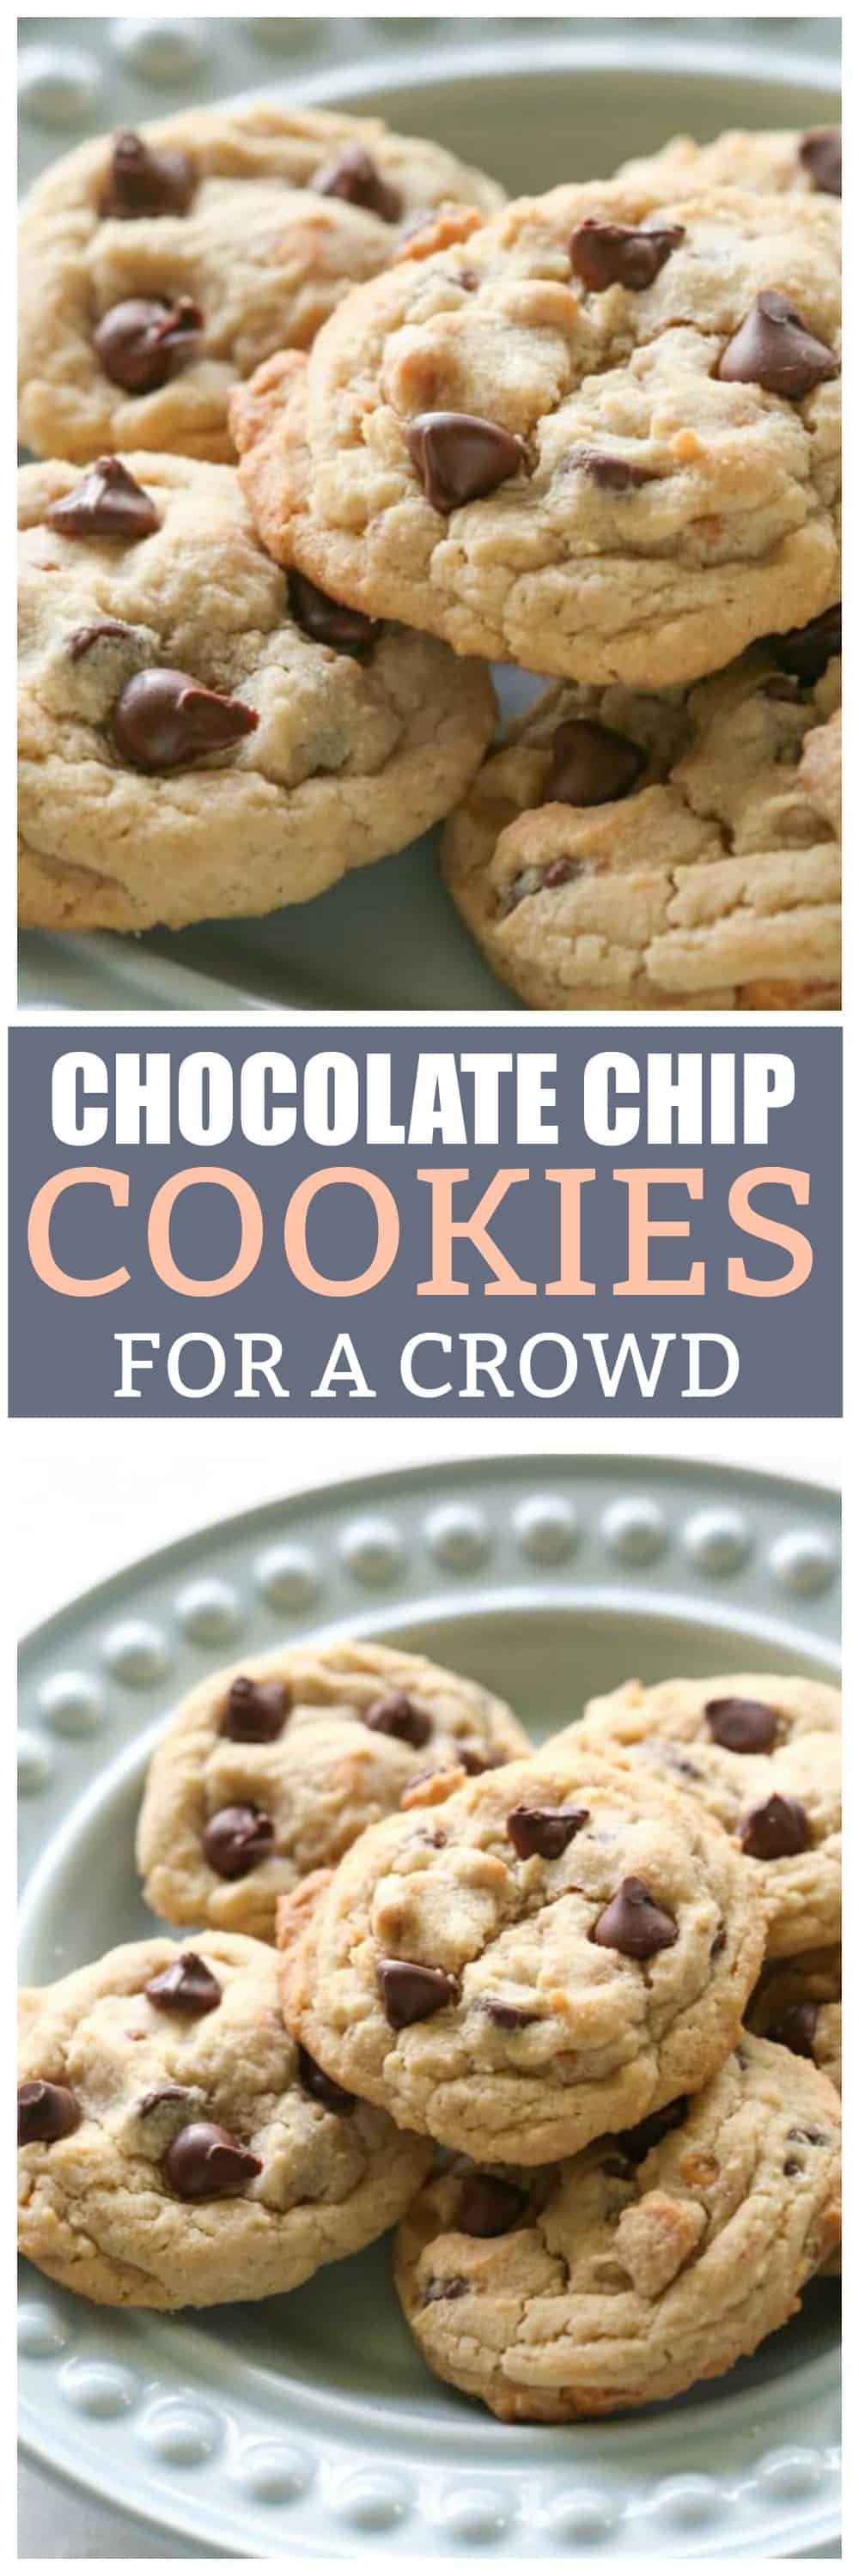 Chocolate Chip Cookies on a plate